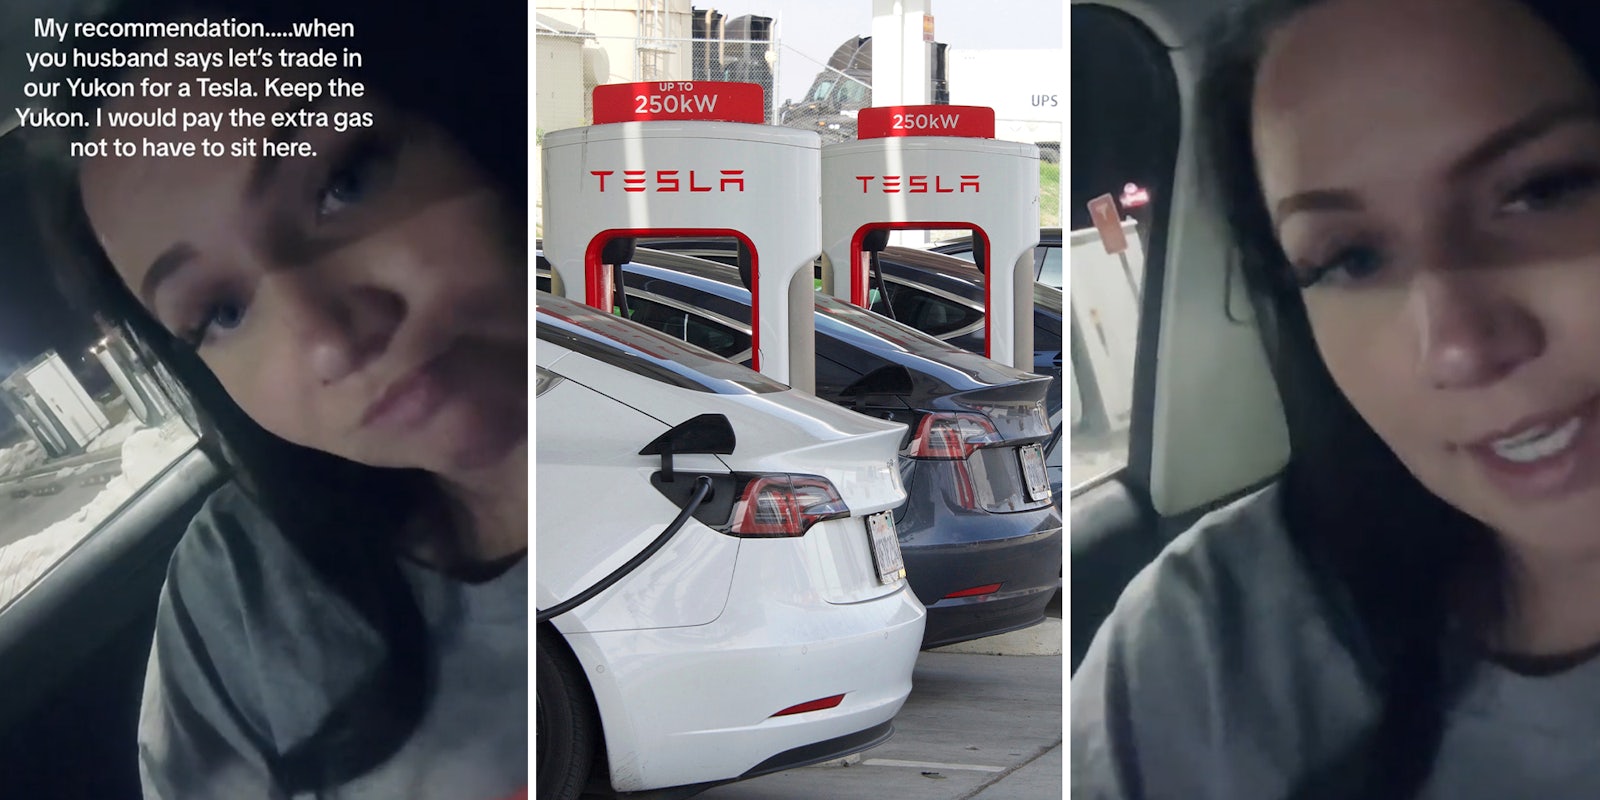 Woman says she regrets Tesla after having to wait over an hour for it to charge ‘just to get home’